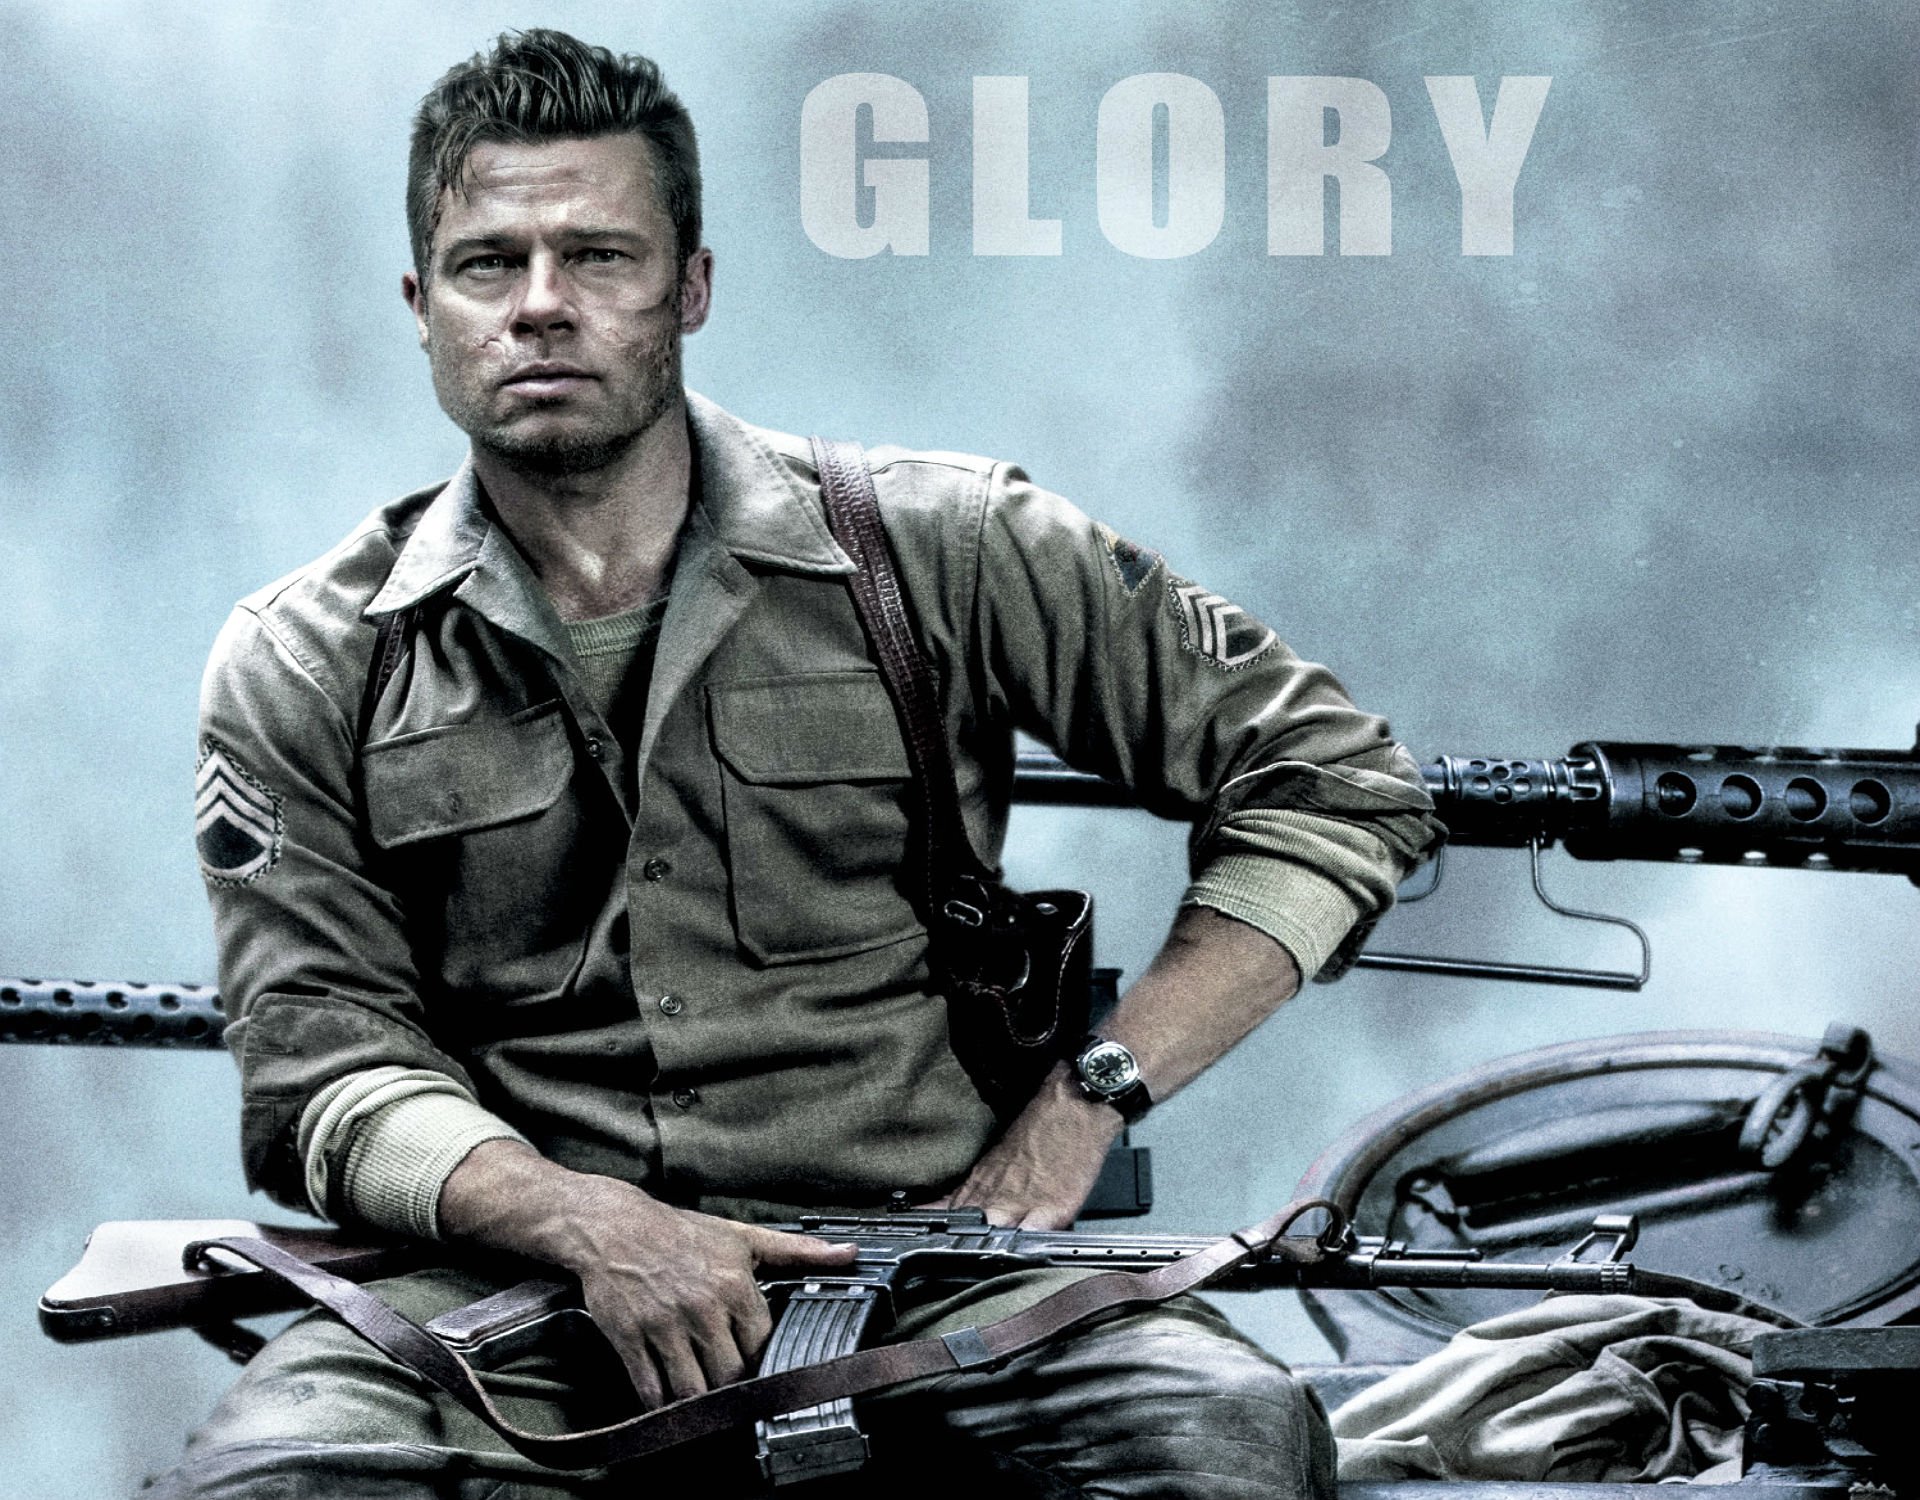 fury wallpaper,movie,action film,poster,album cover,technology